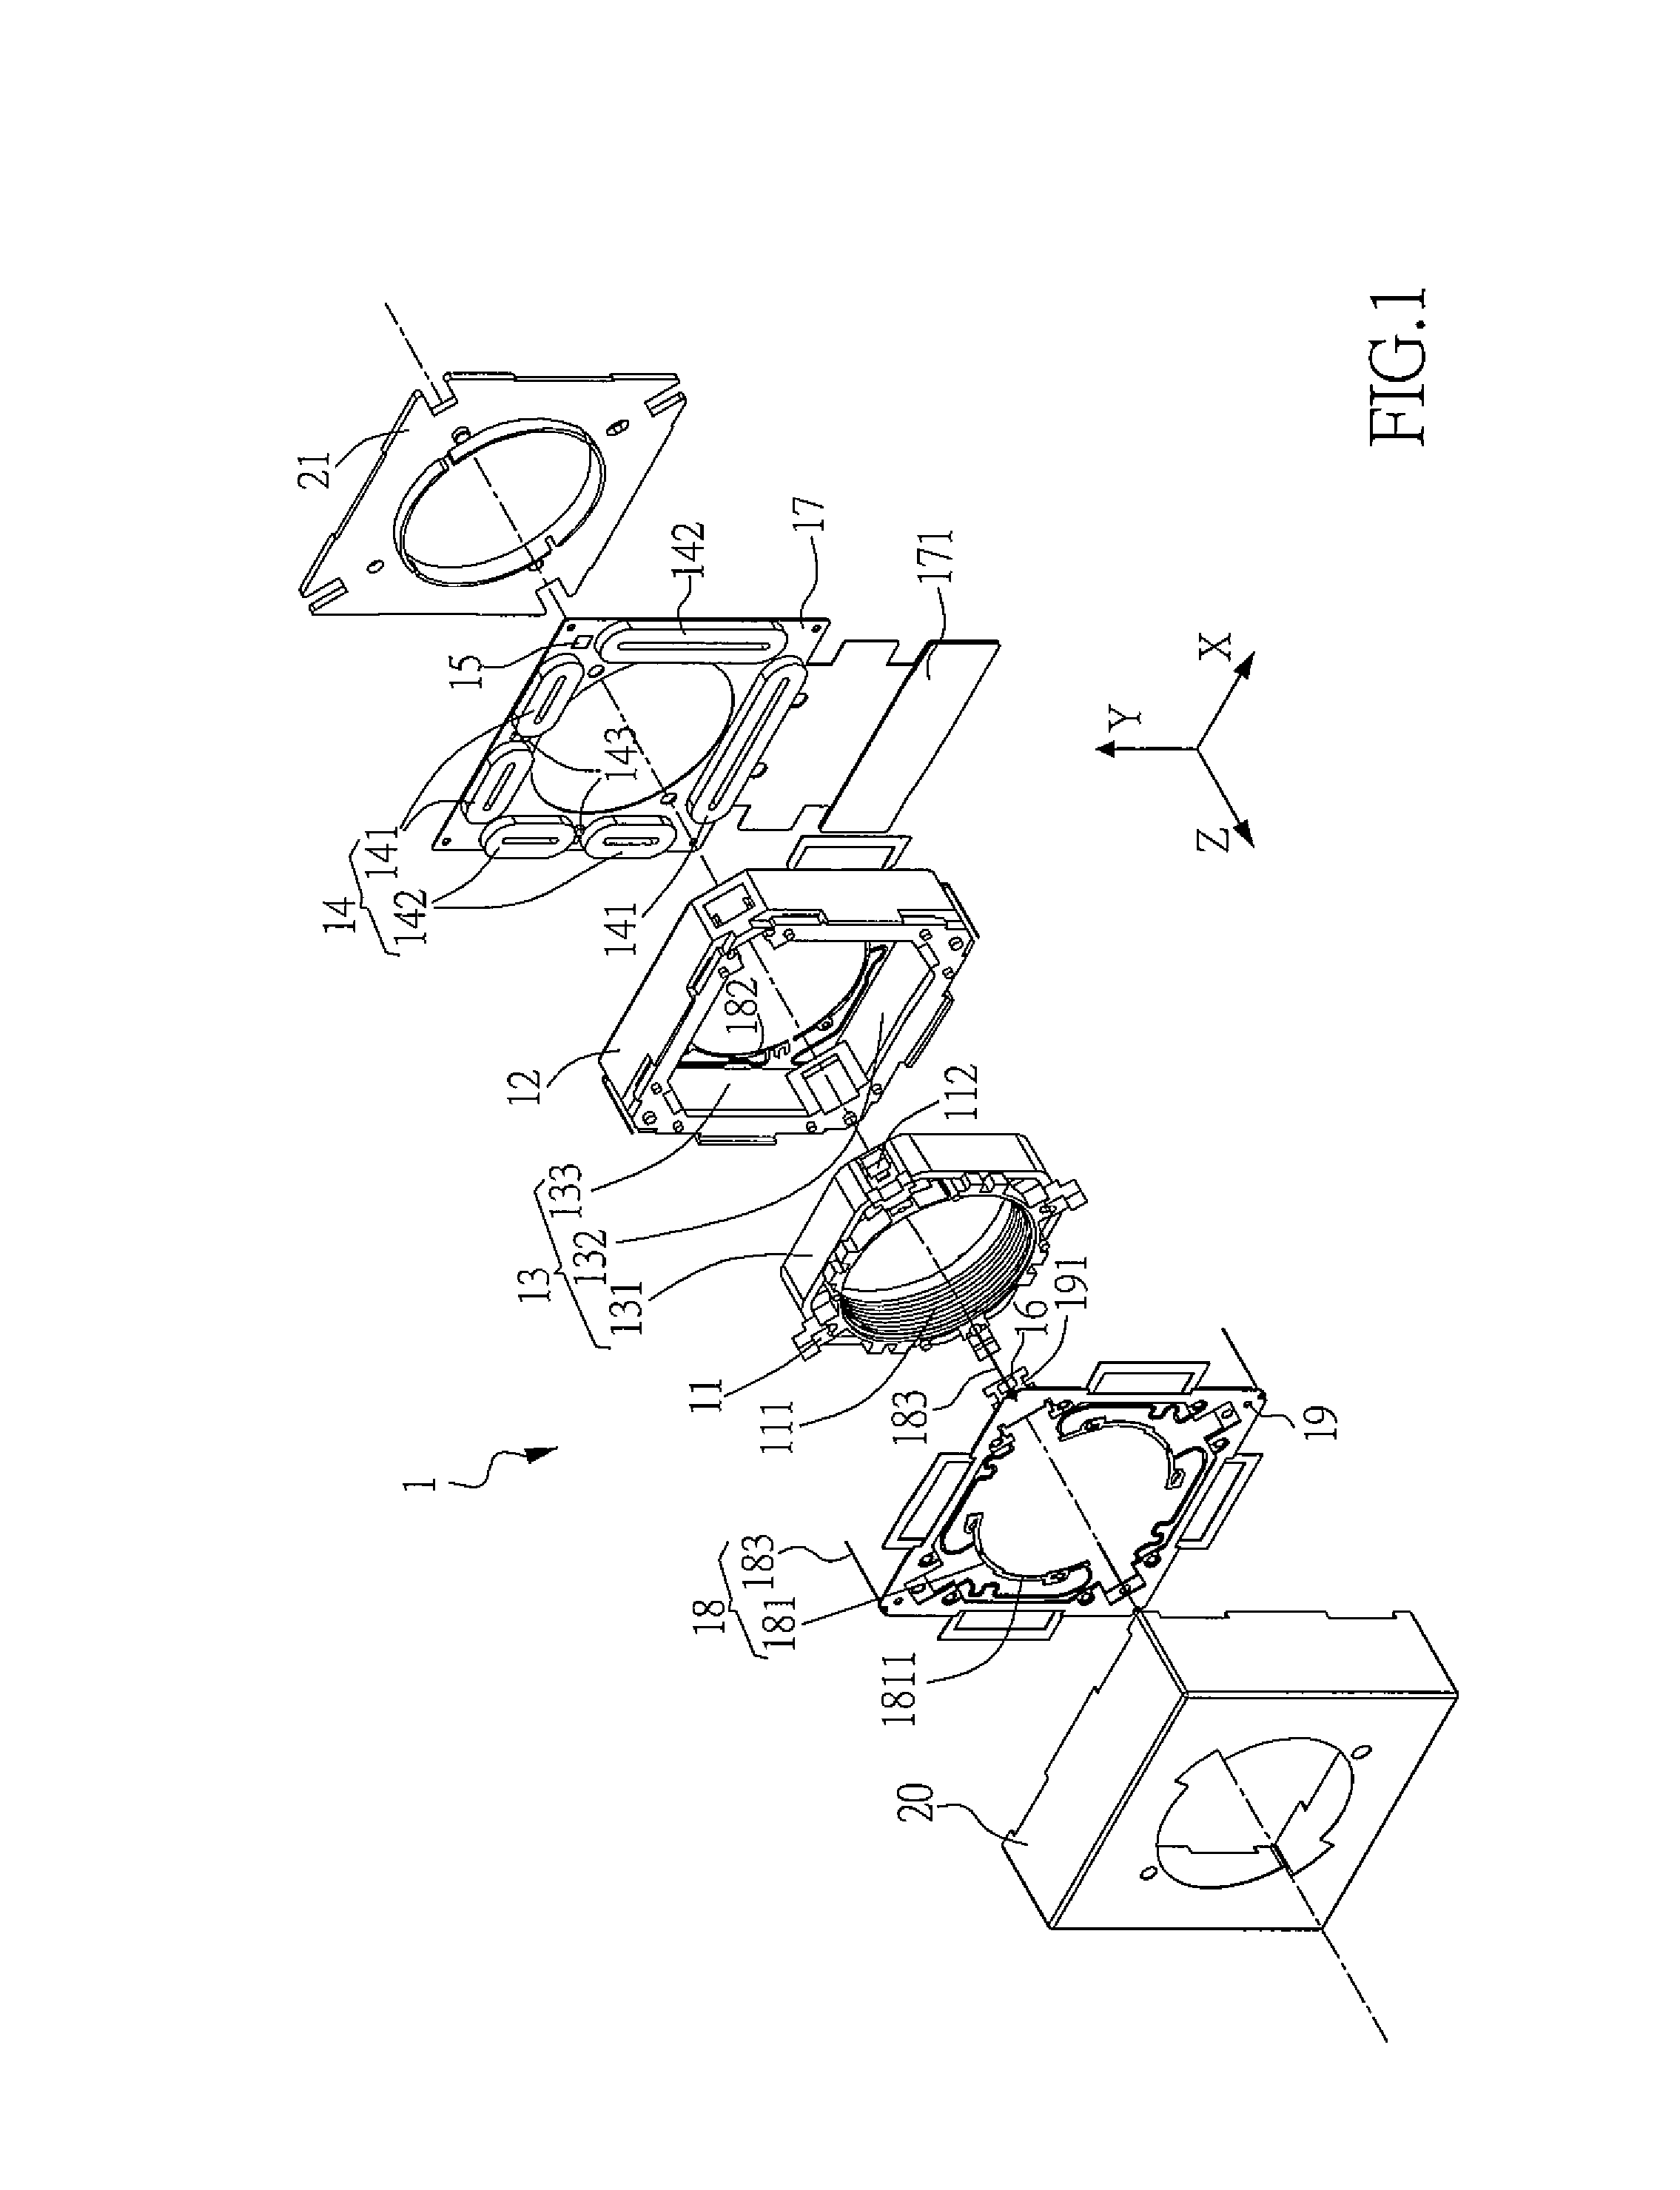 Tri-Axis Close Loop Feedback Controlling Module for Electromagnetic Lens Driving Device